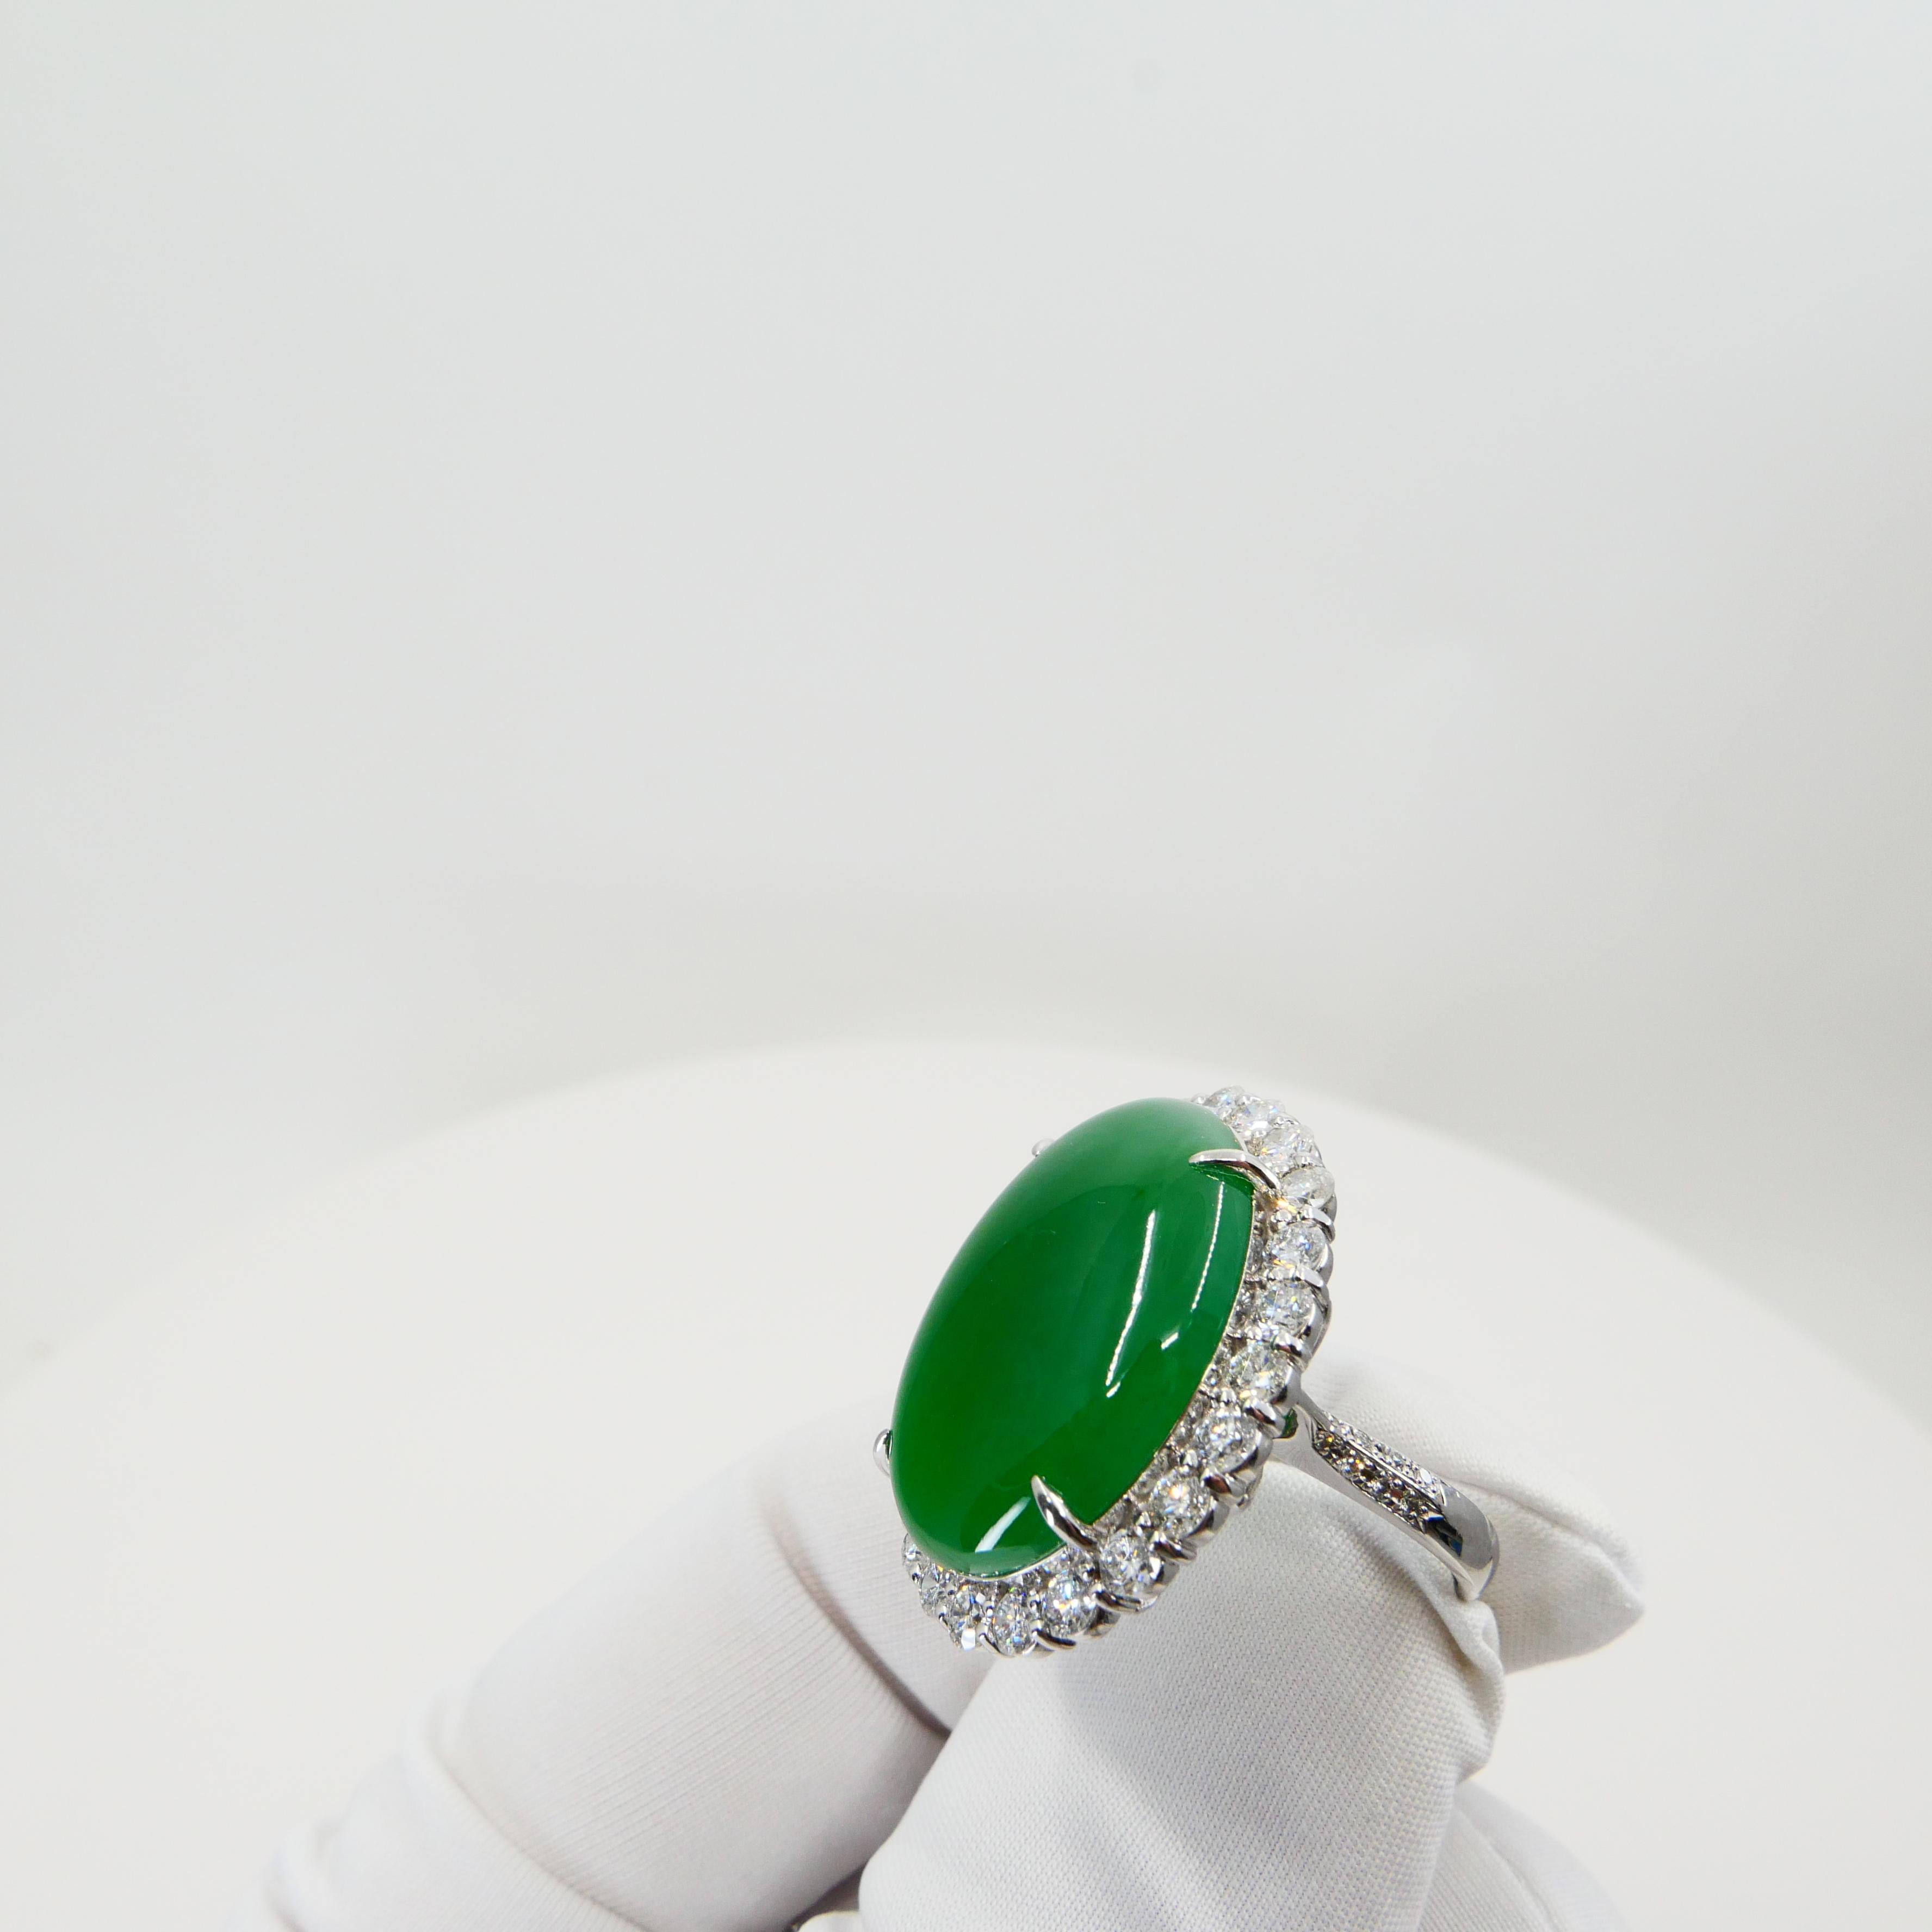 Certified 21 Cts Jade & Diamond Cocktail Ring, Intense Apple Green, Massive 10